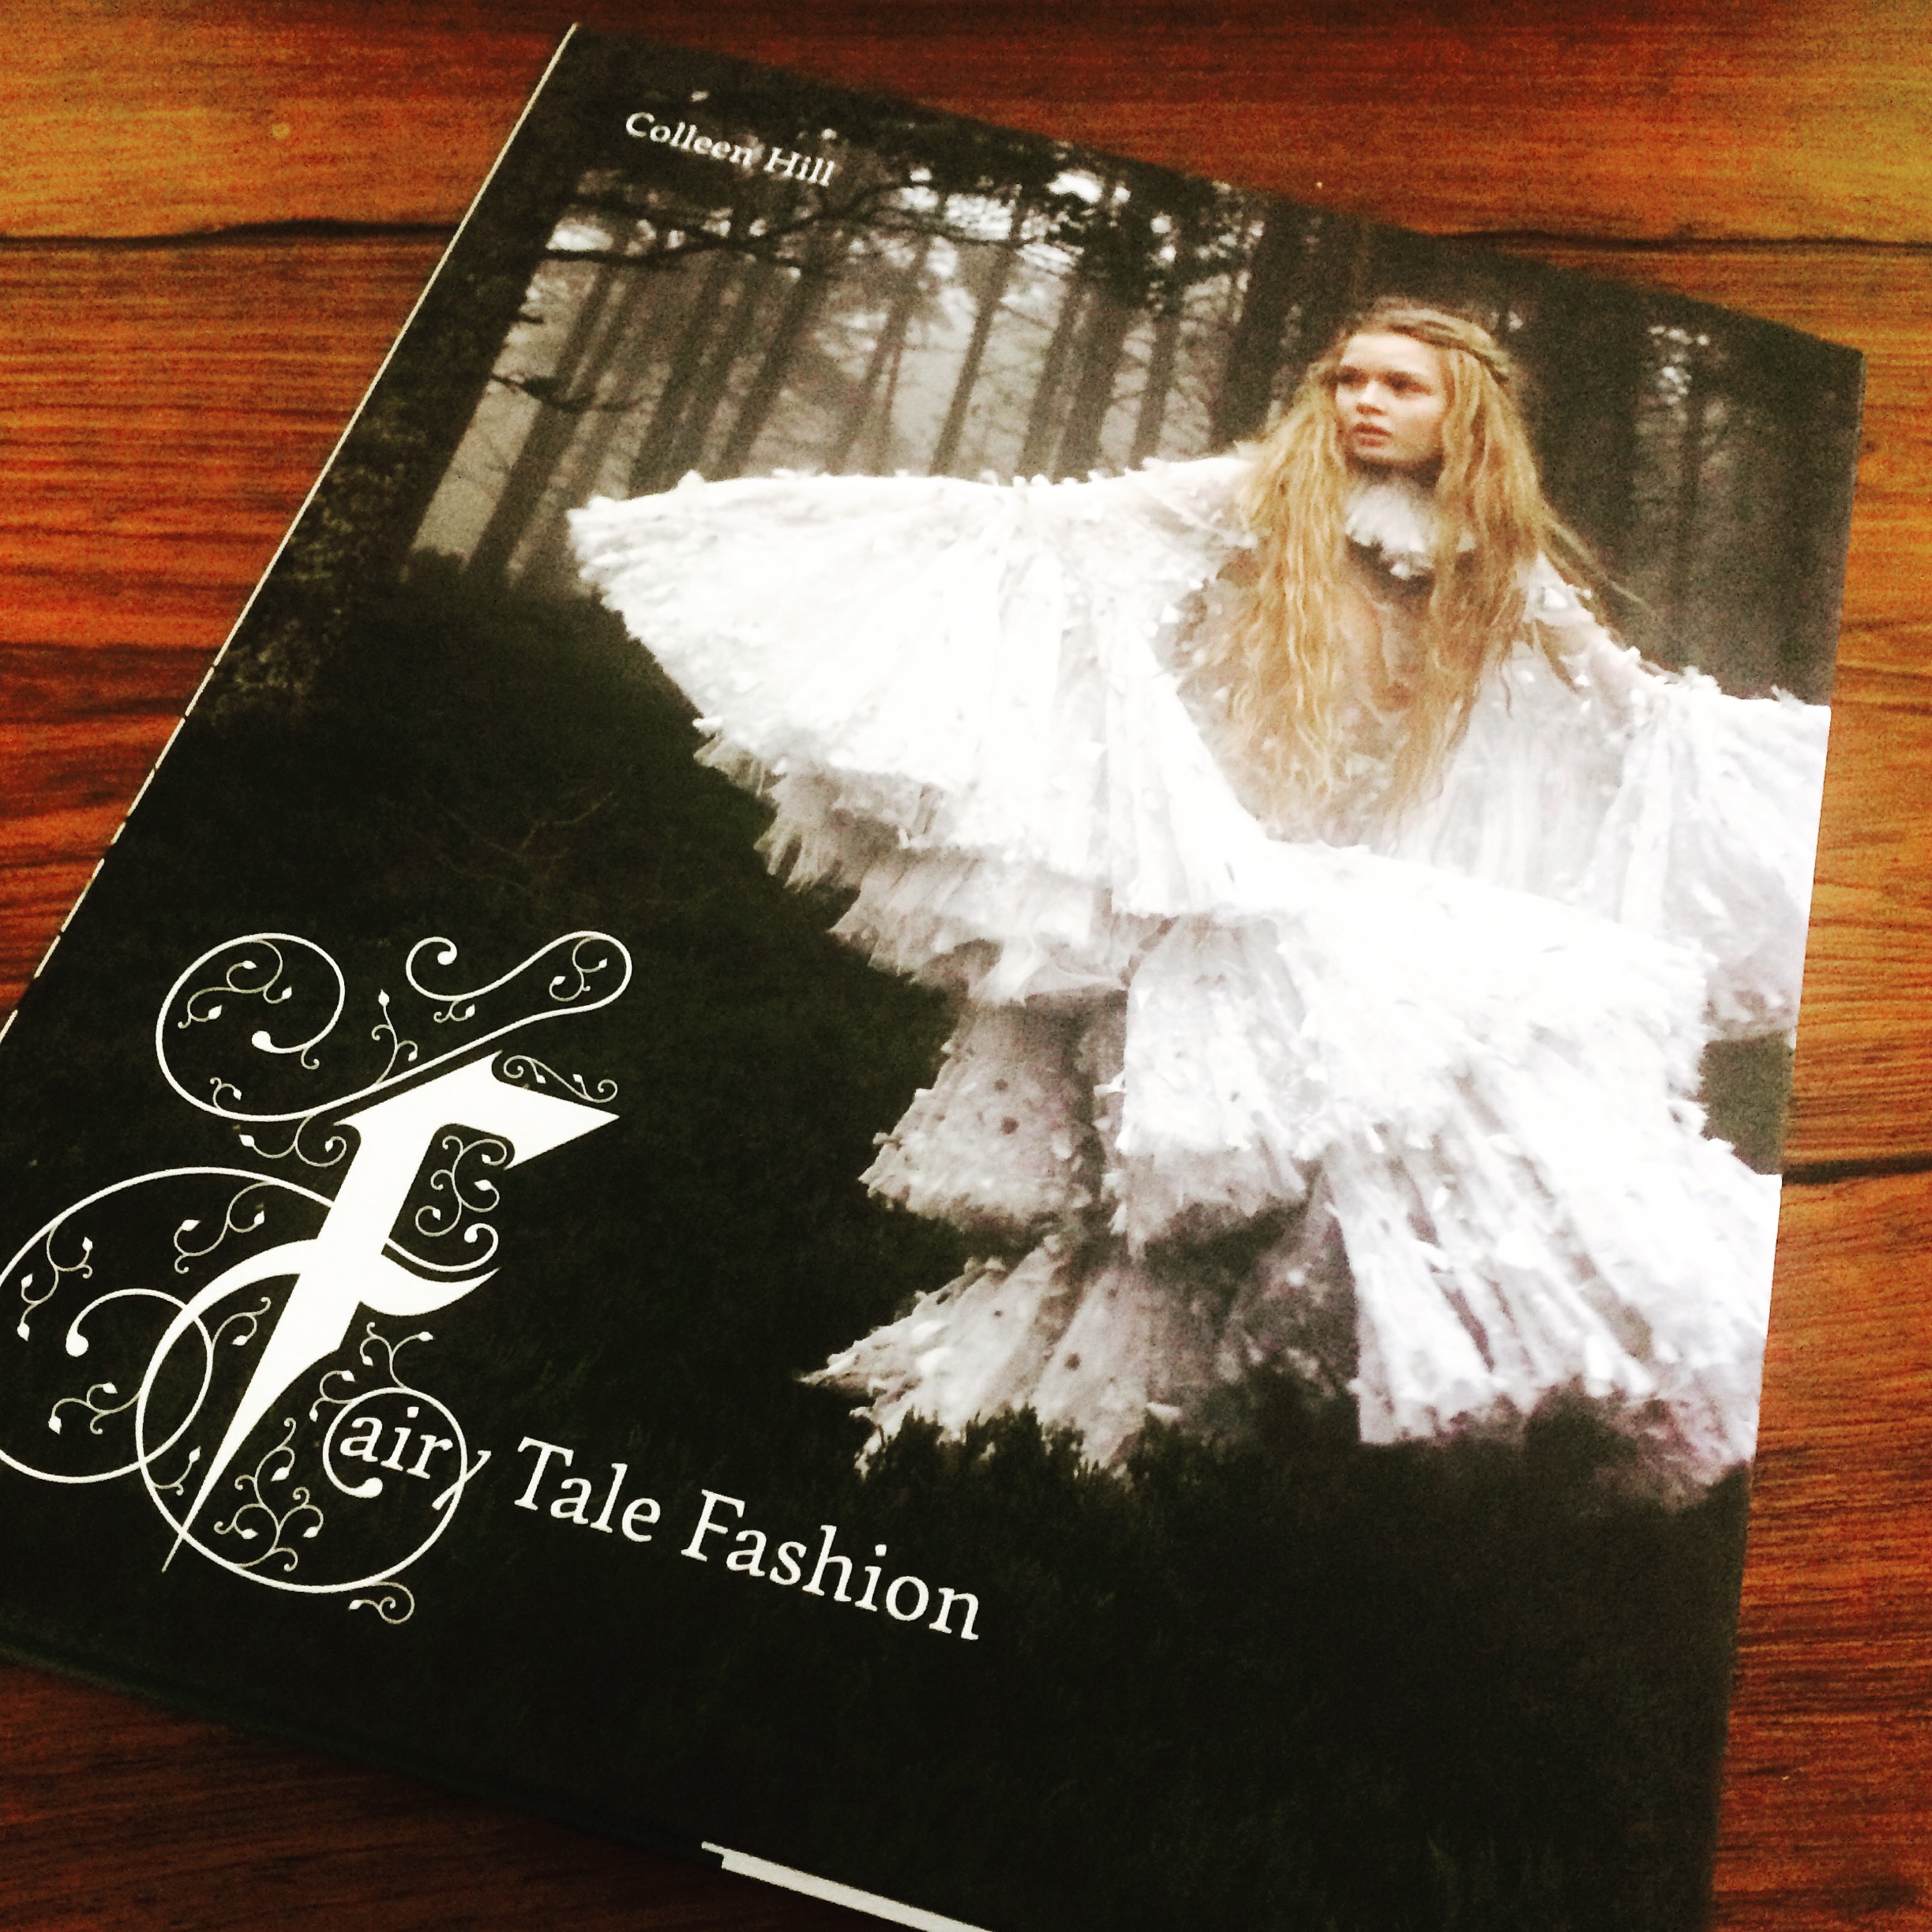 Fairy Tale Fashion exchibition catalog by Colleen Hill